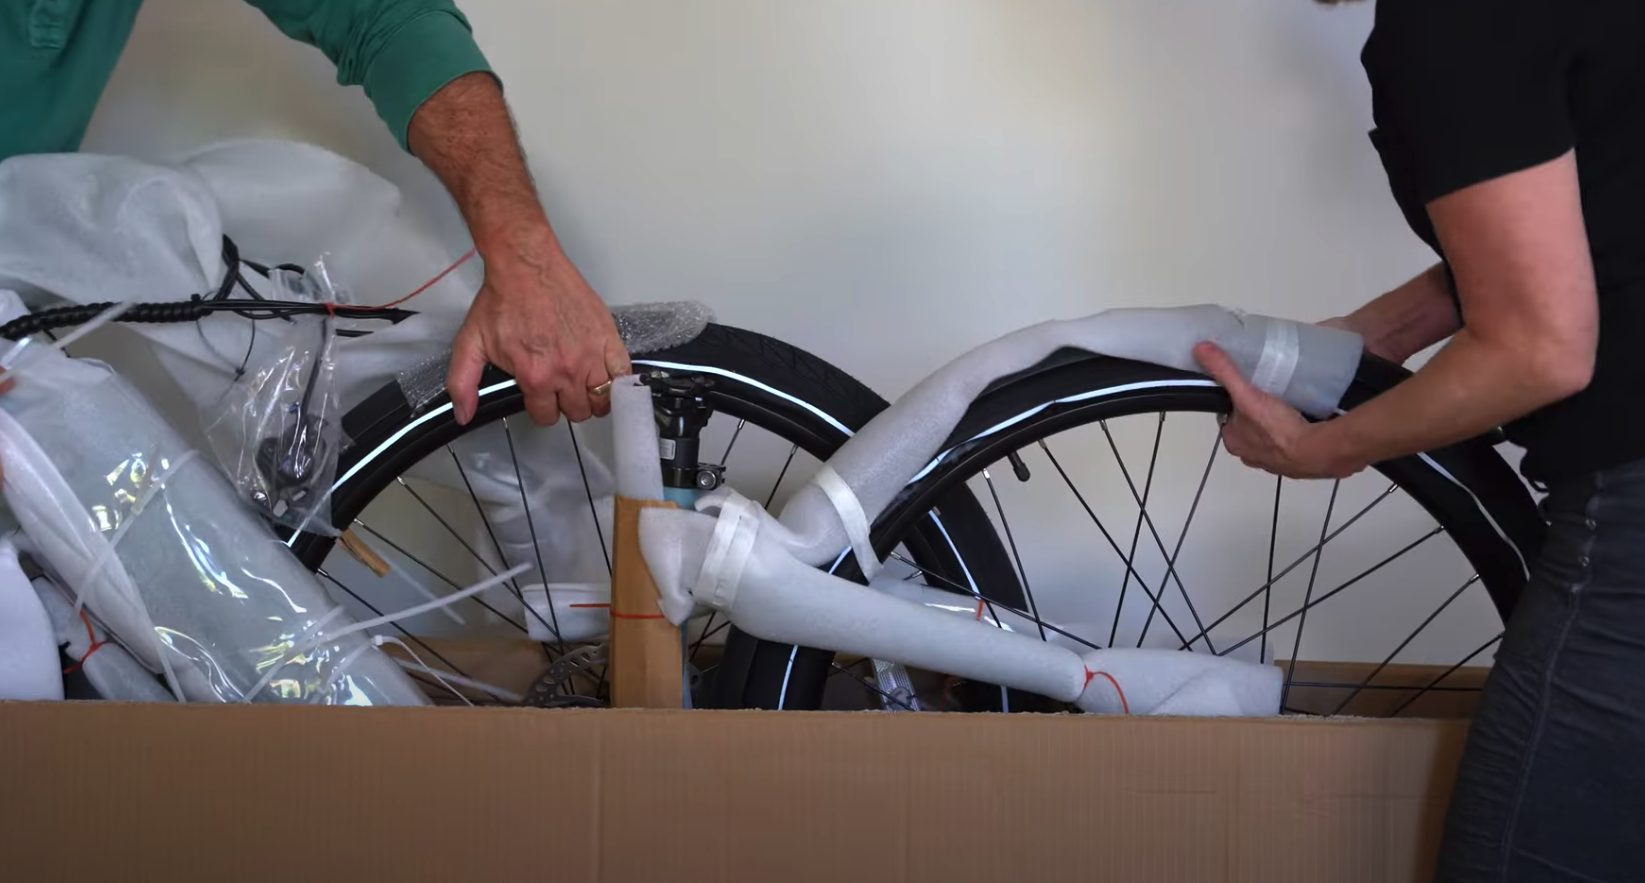 two people pulling electric bike out of box